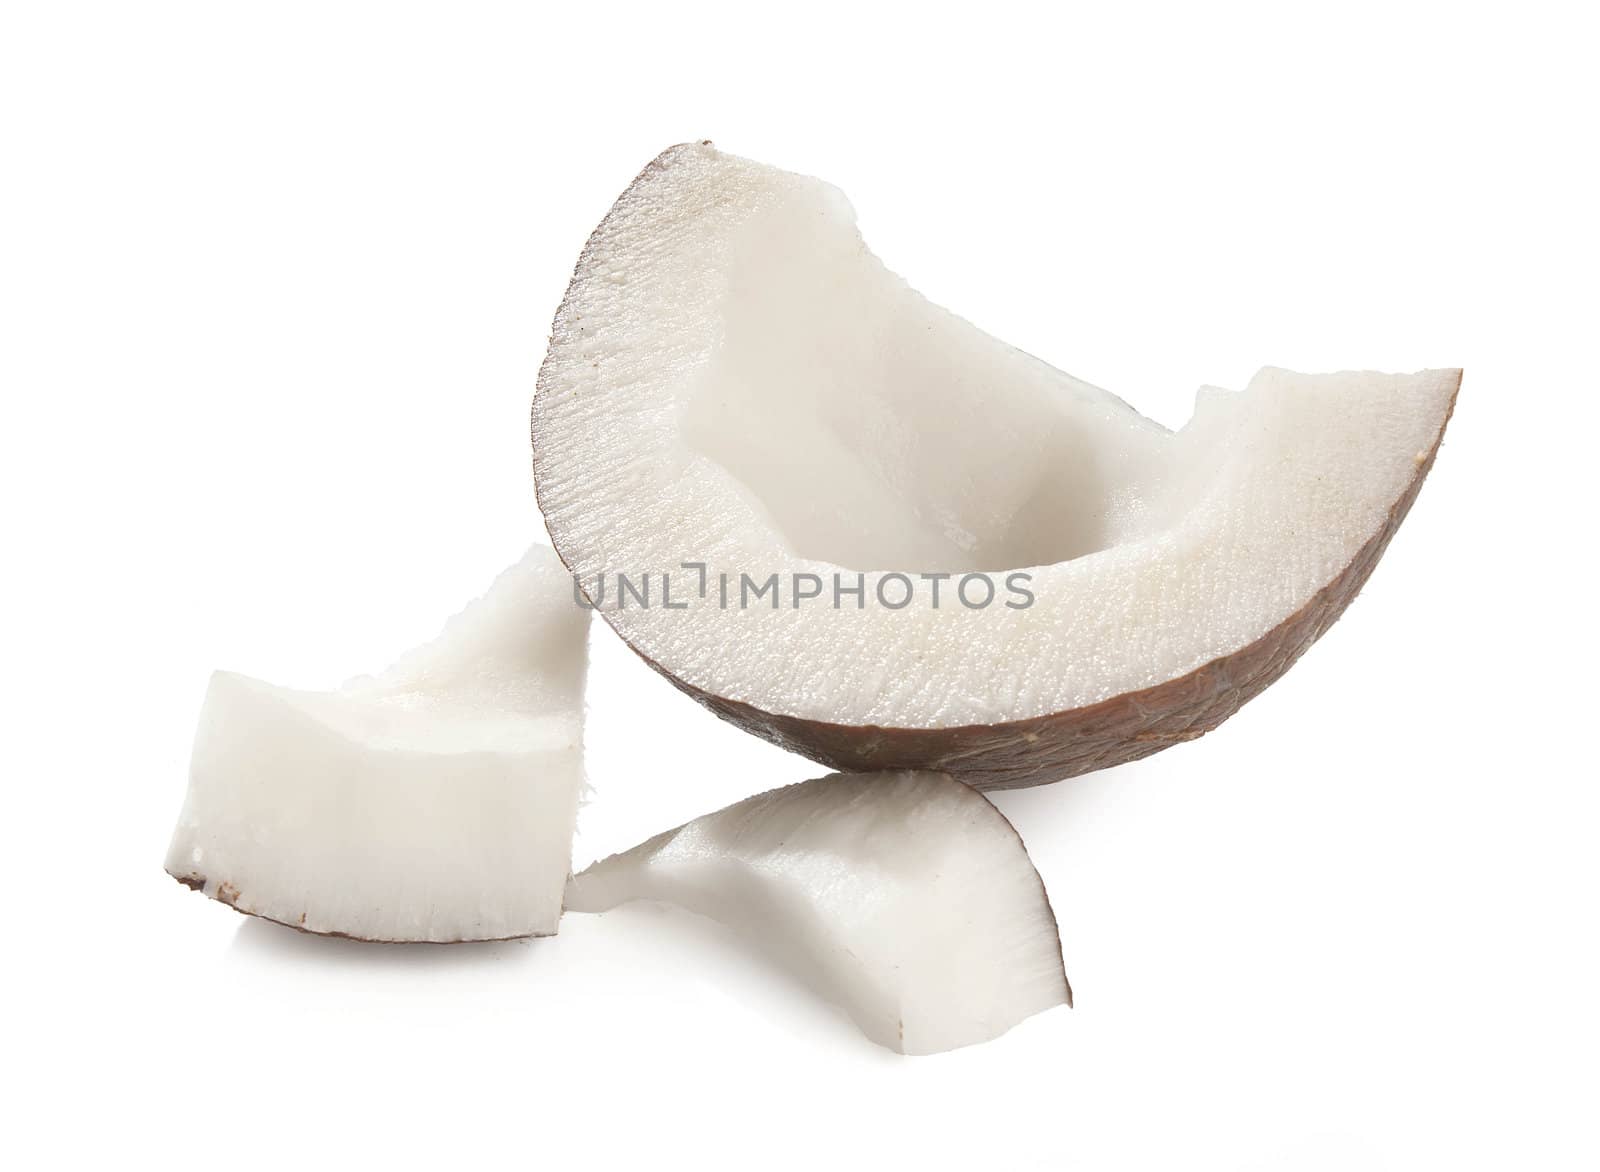 Pieces of coconut's pulp on the white background